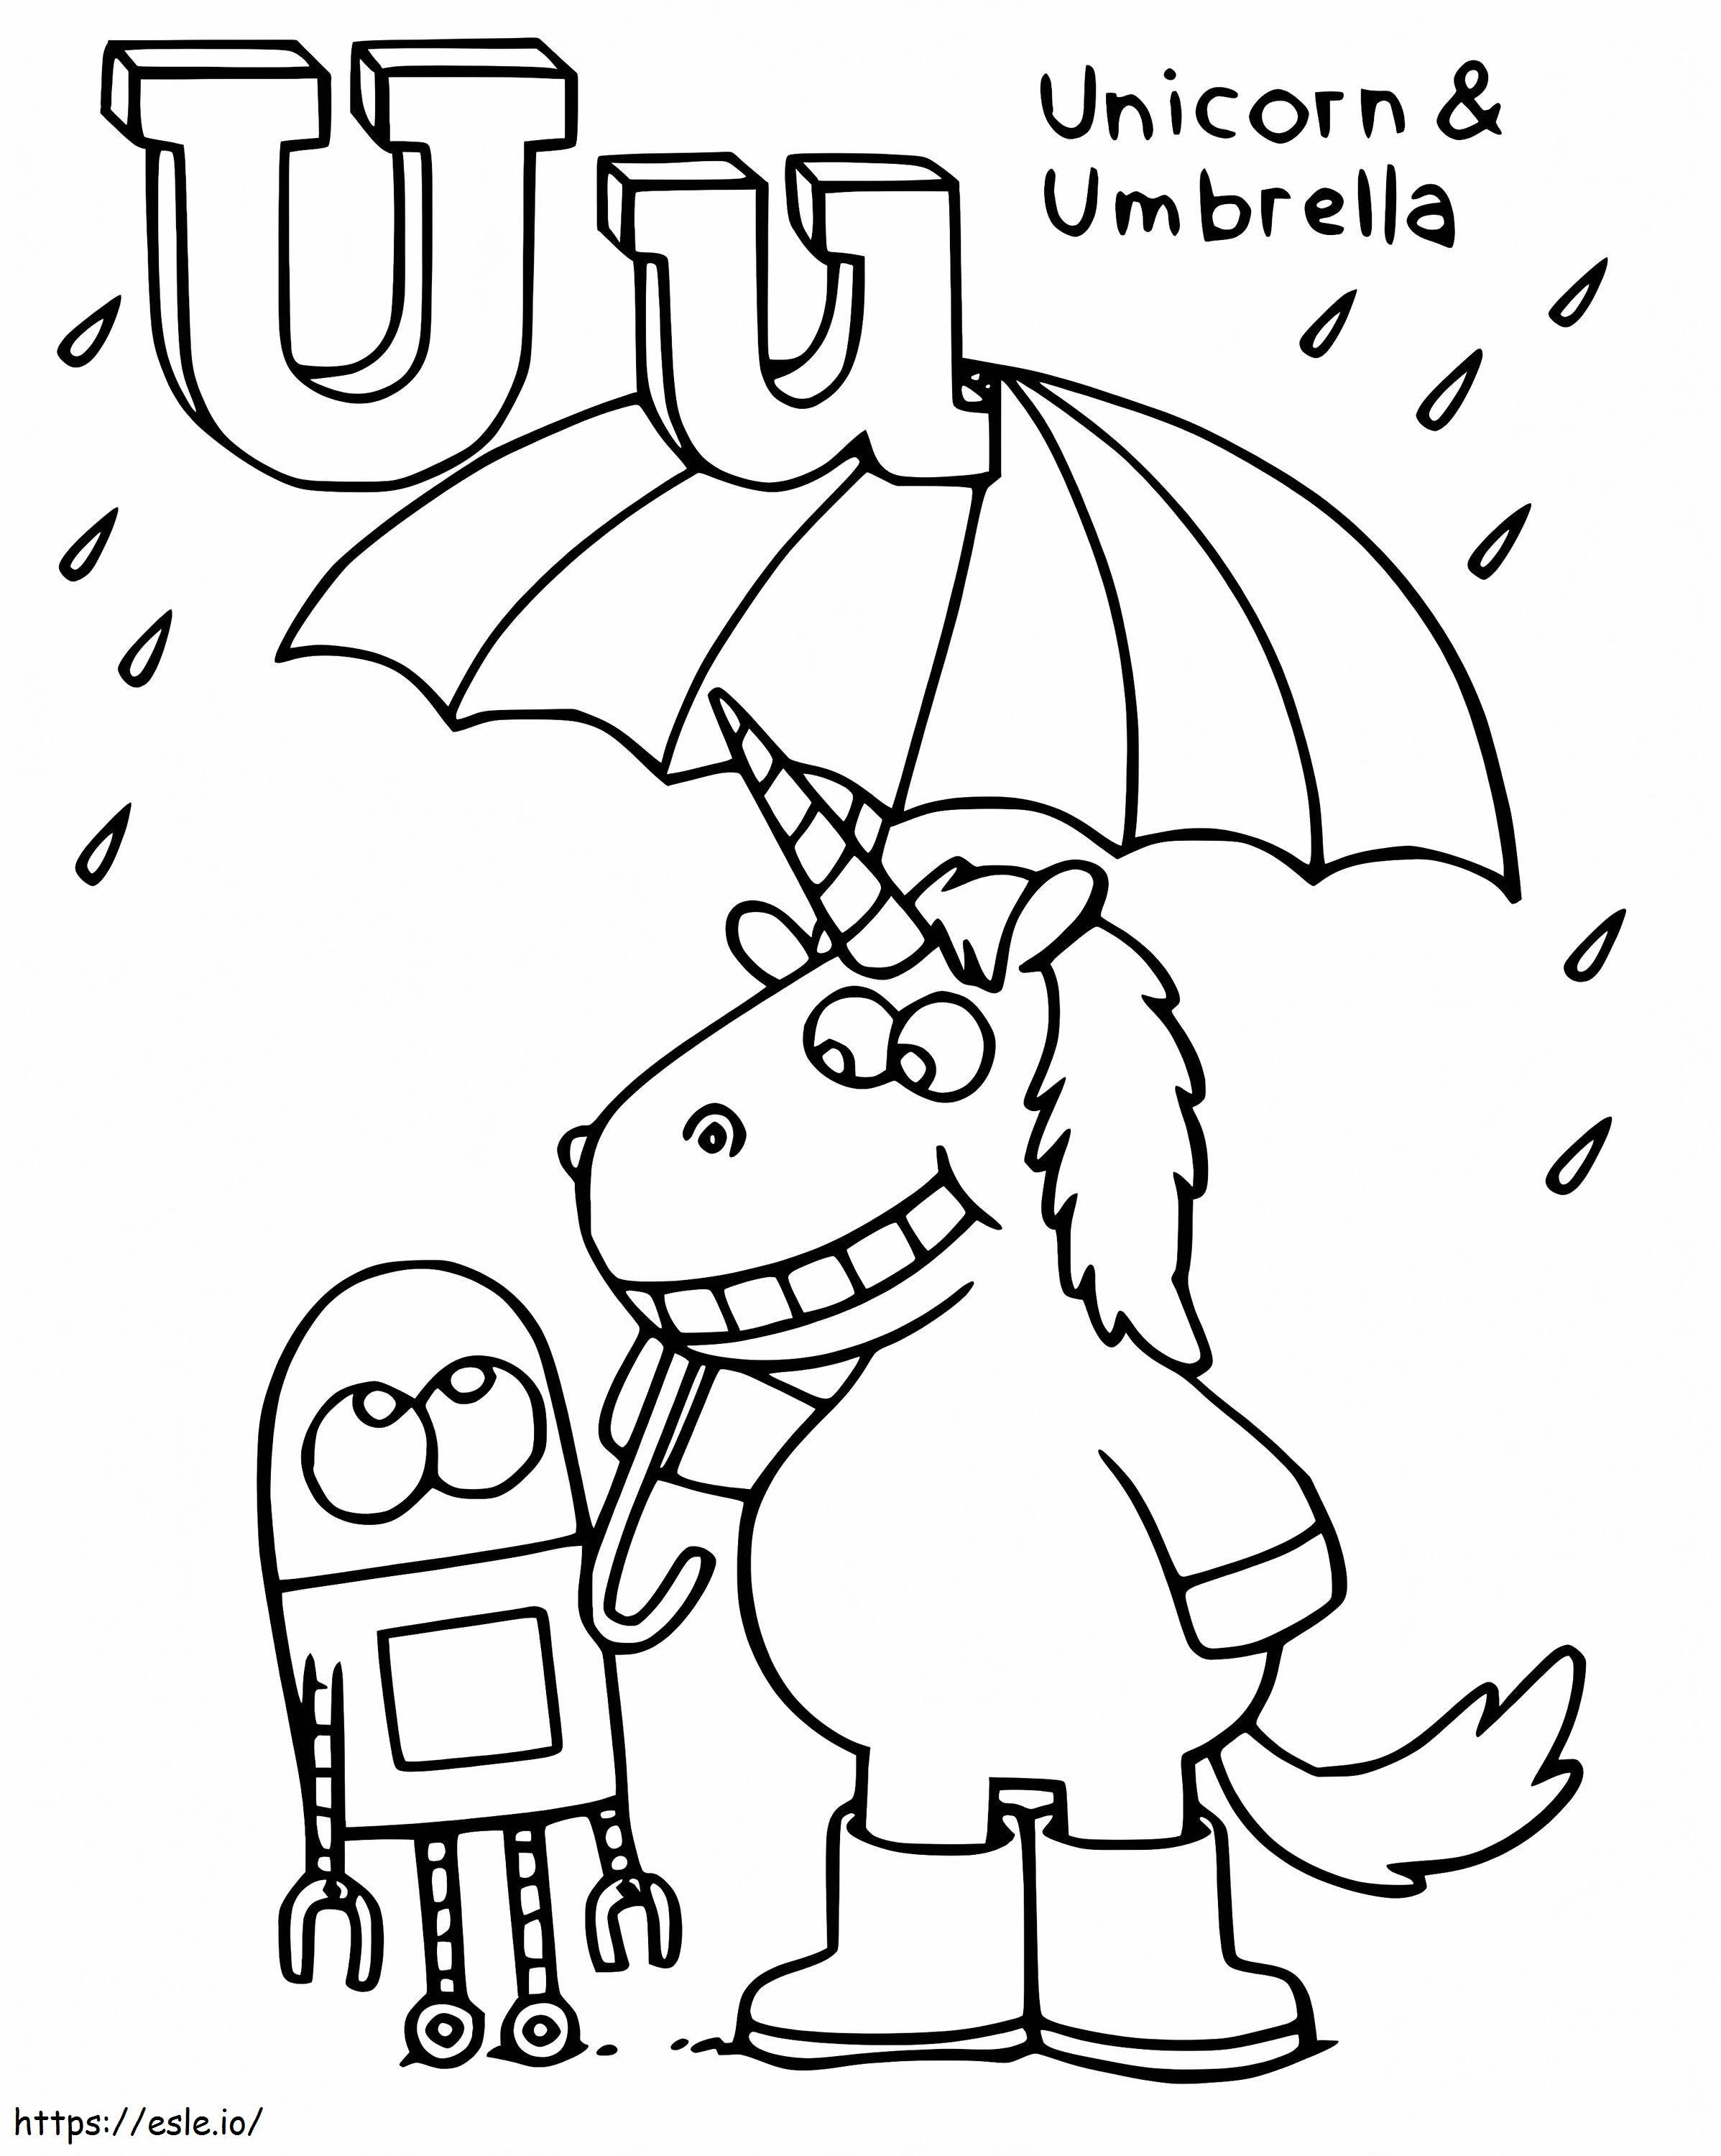 StoryBots Letter U coloring page